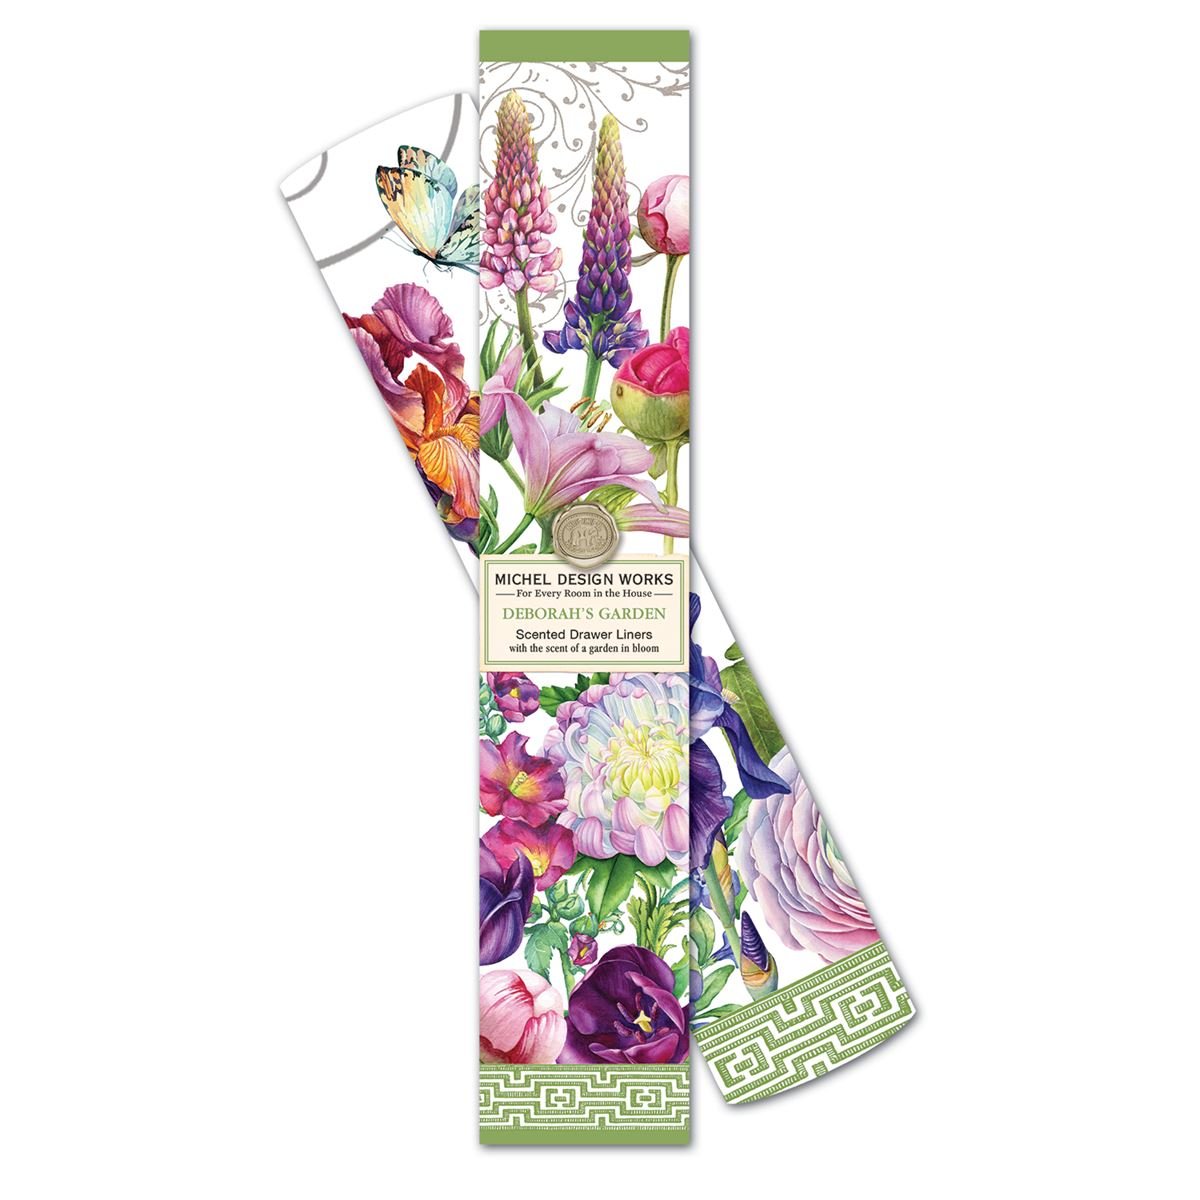 Michel Design Works "Orchids in Bloom" Pure cotton printed tea towel. 